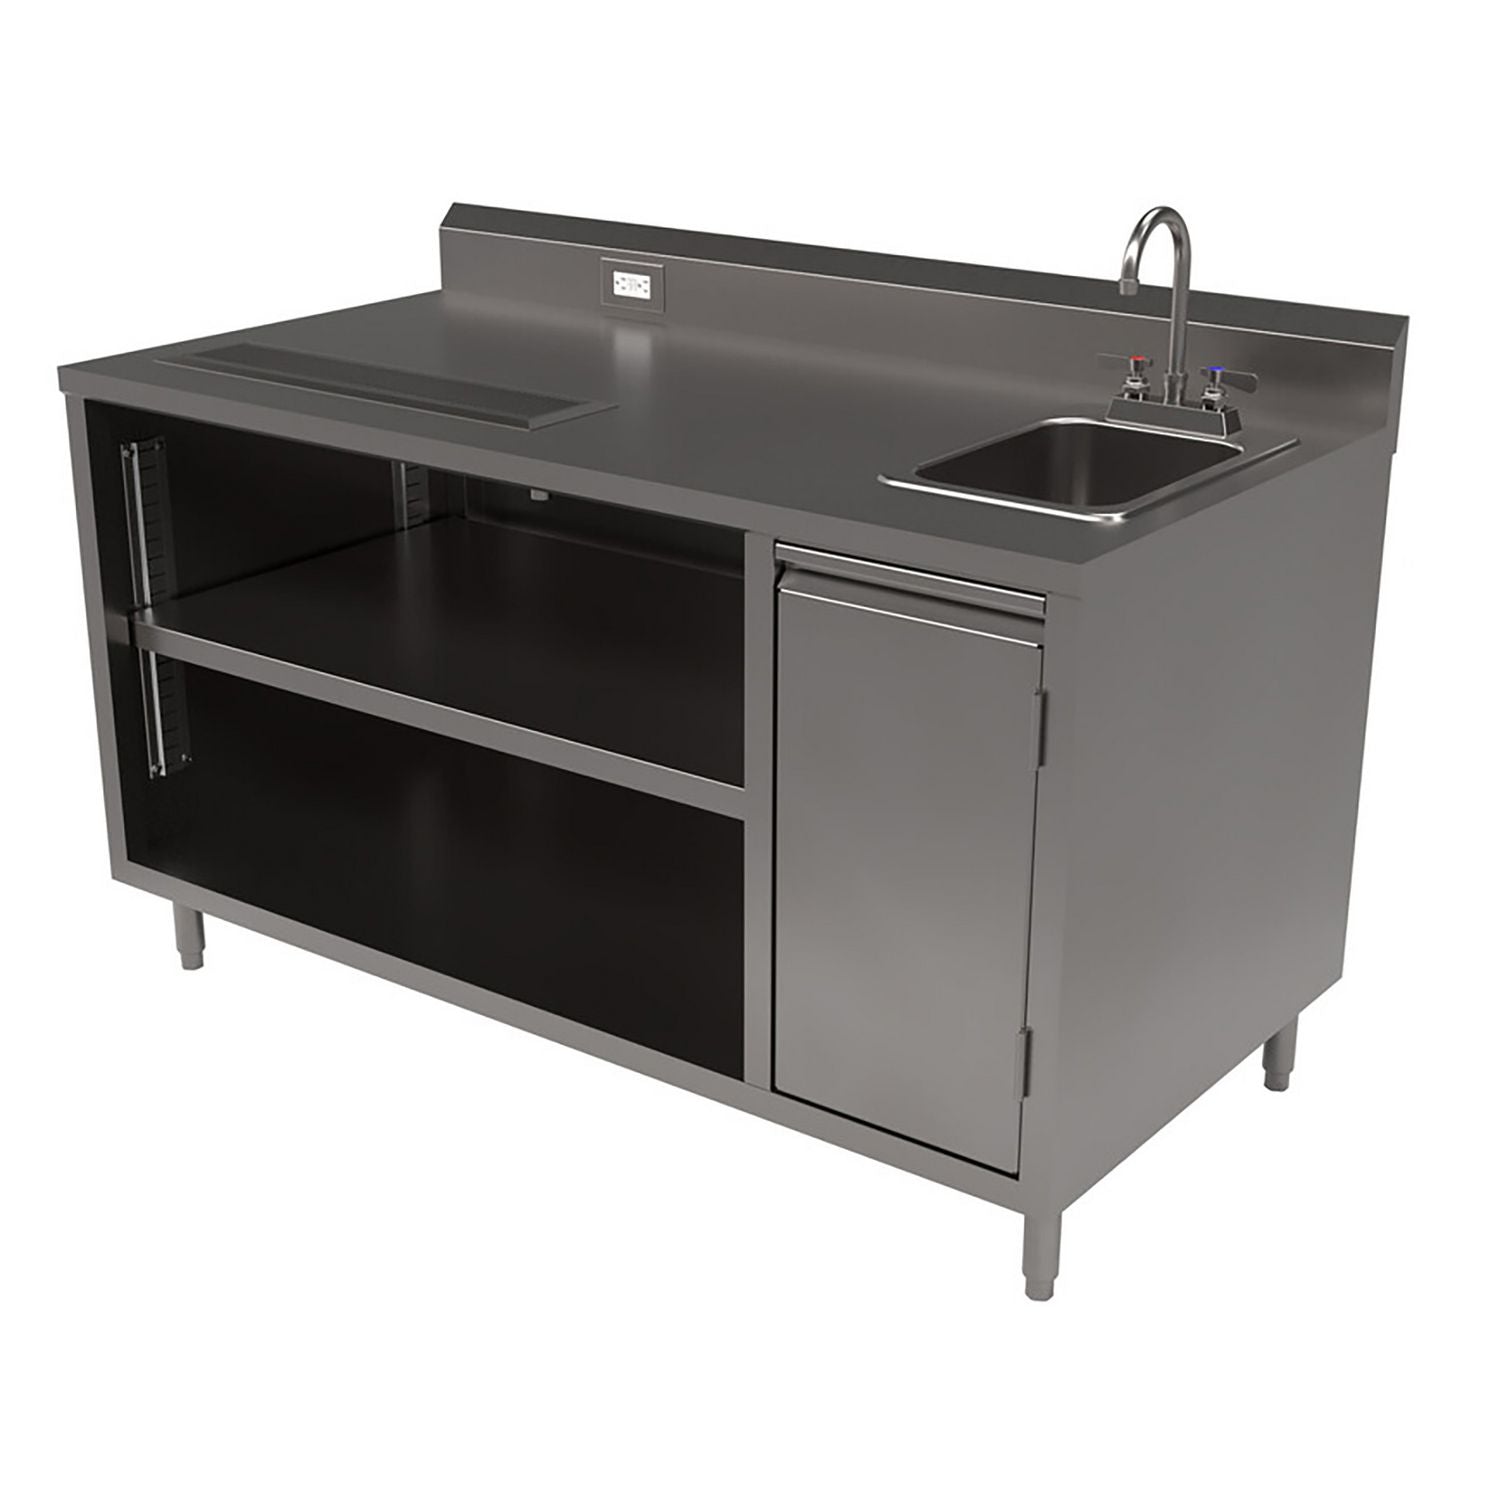 stainless-steel-beverage-table-with-right-sink-rectangular-30-x-60-x-415-silver-top-base-ships-in-4-6-business-days_bkebevt3060r - 4